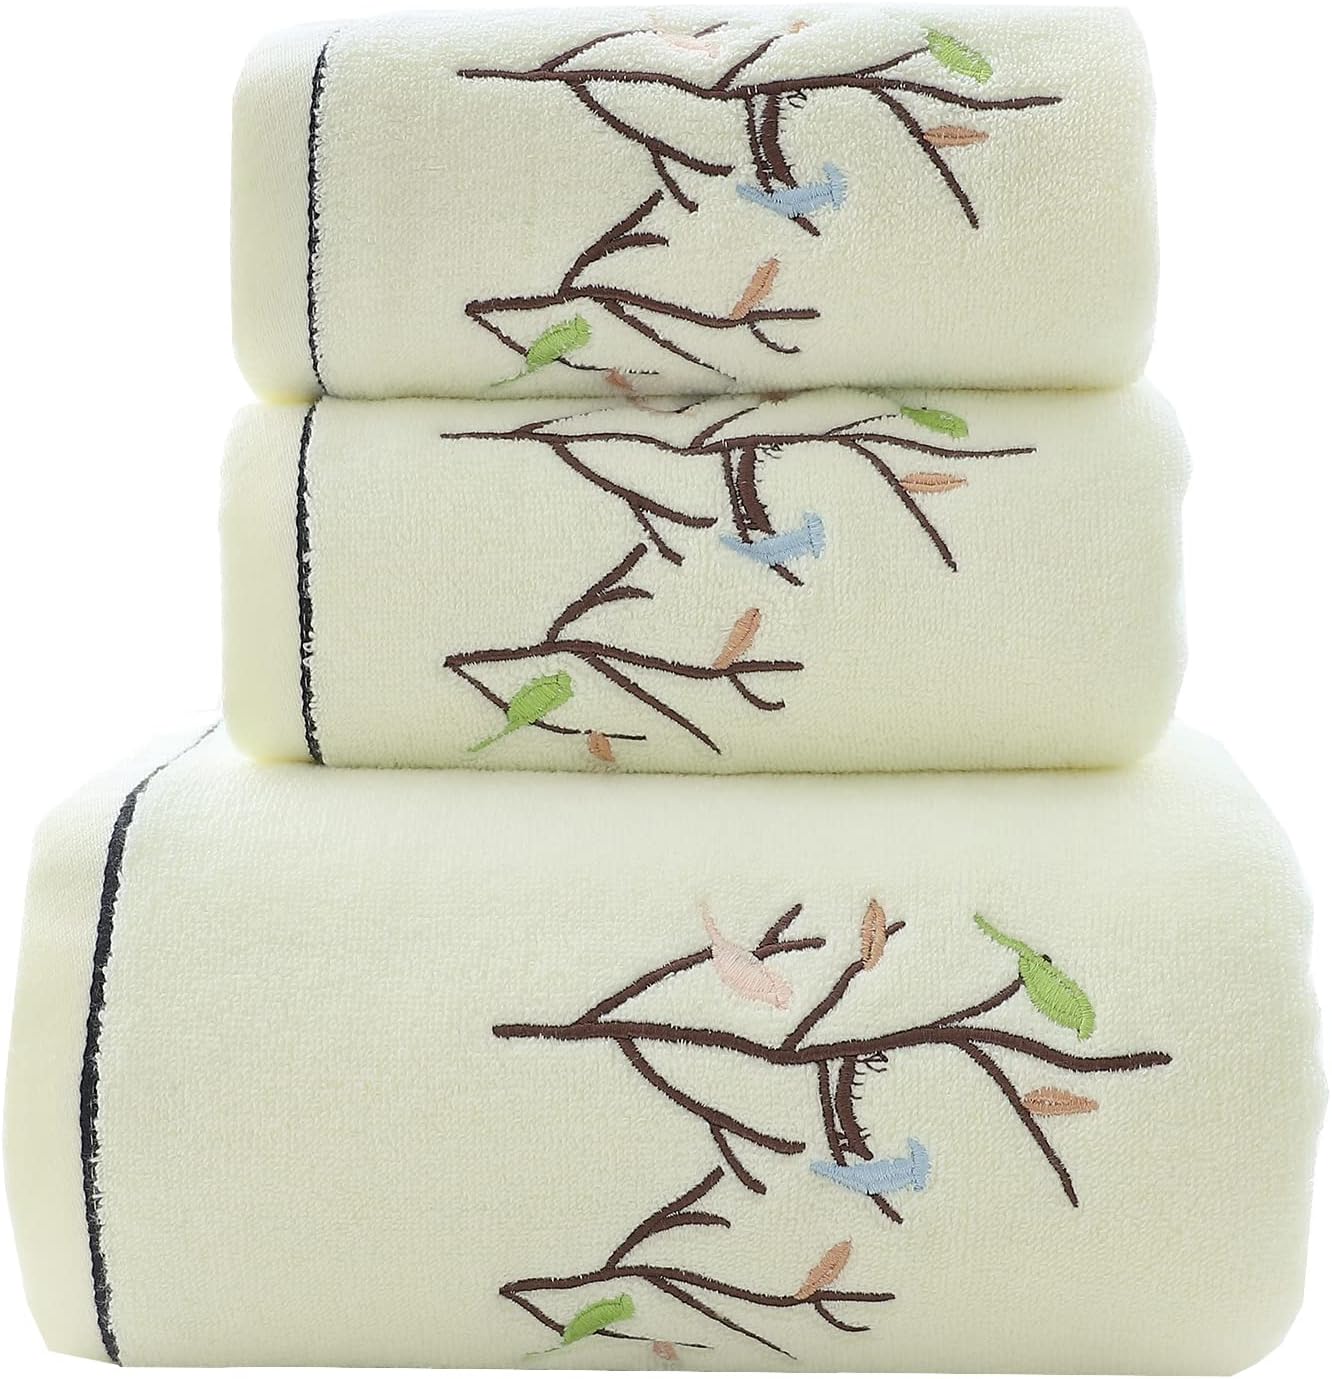 Pidada Bath Hand Towel Set of 3 Embroidered Bird Tree Pattern 100% Cotton Soft Absorbent Decorative Towels for Bathroom (Light Yellow)